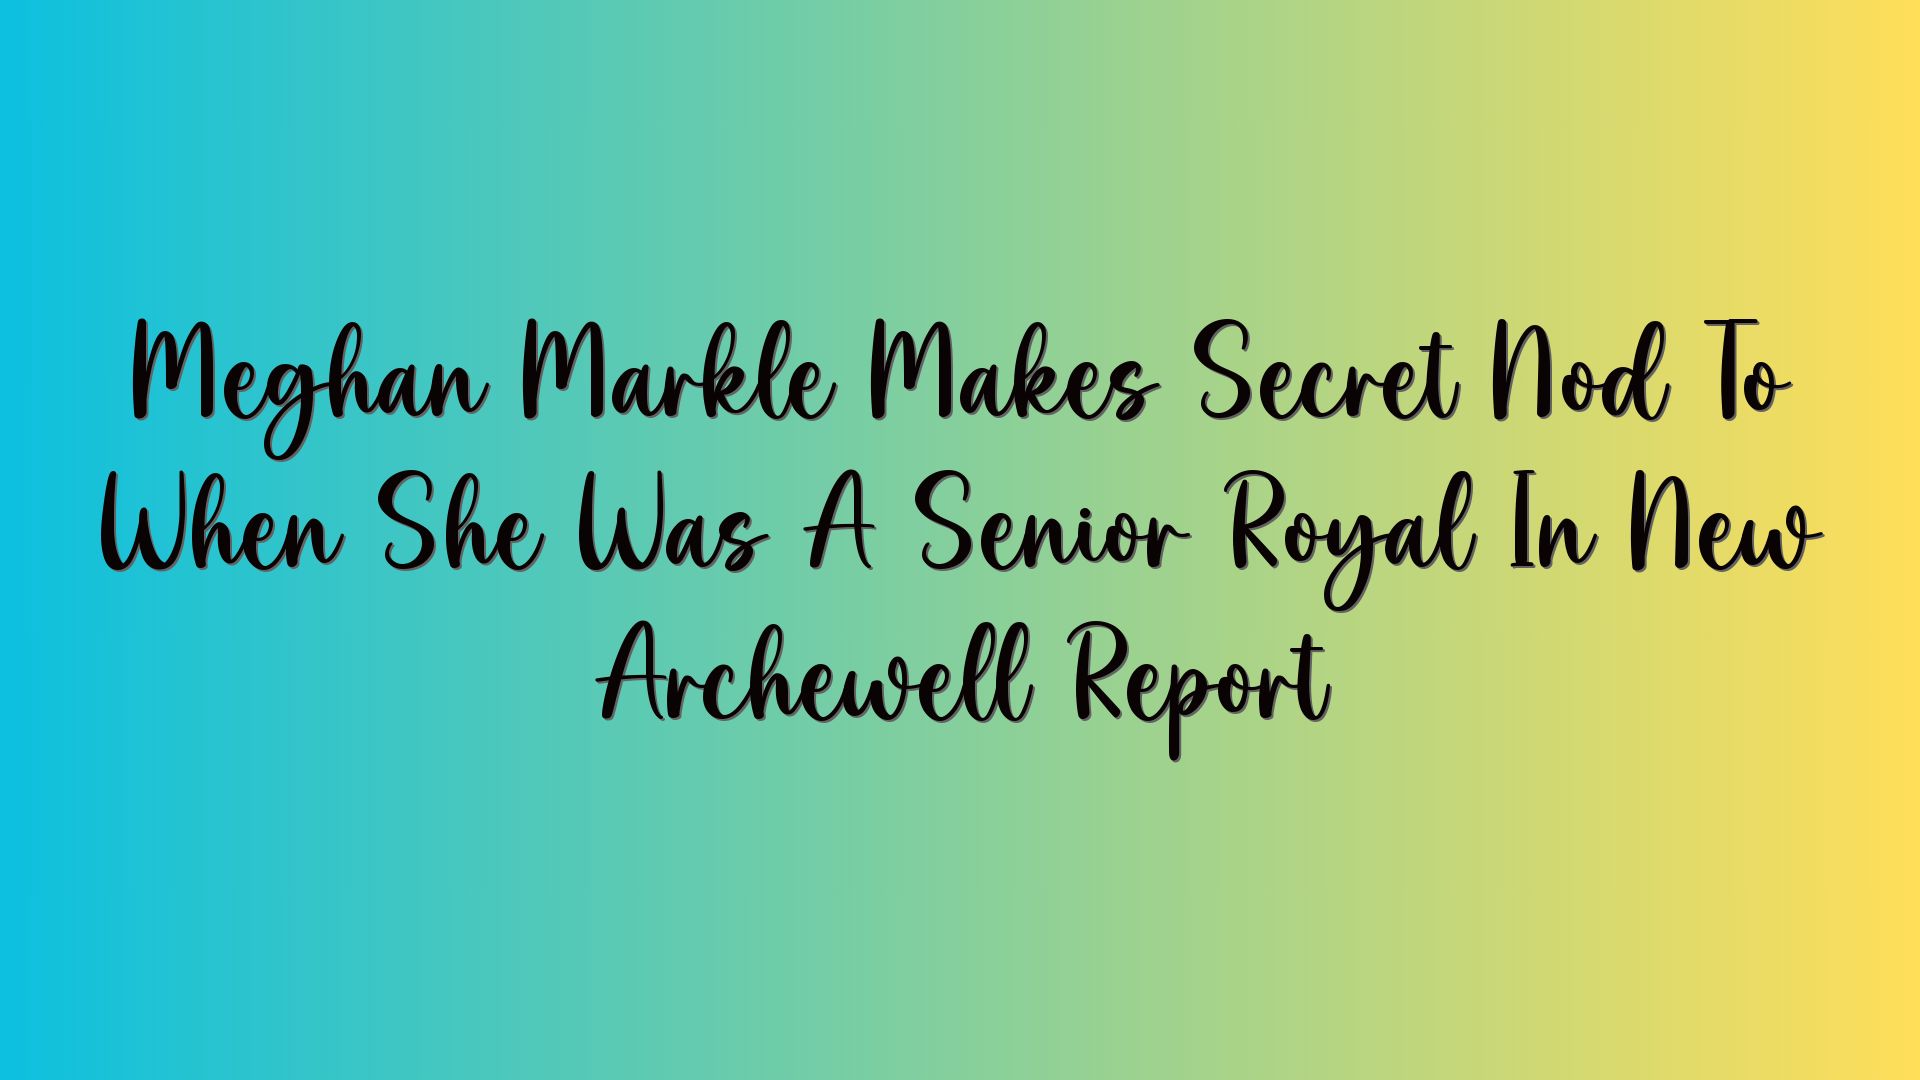 Meghan Markle Makes Secret Nod To When She Was A Senior Royal In New Archewell Report